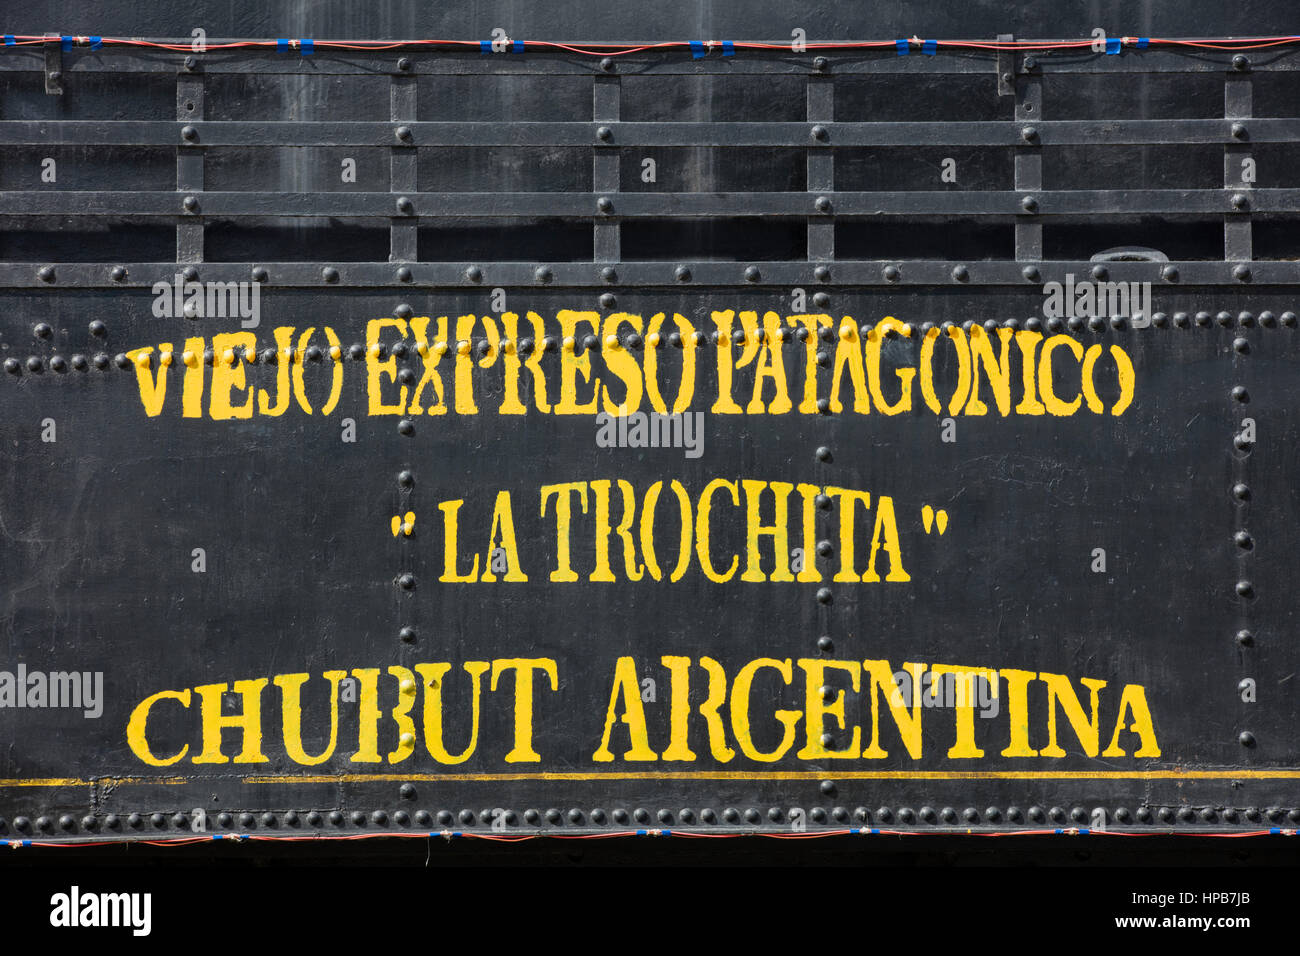 The Old Patagonian Express. El Maiten, Argentina. Stock Photo